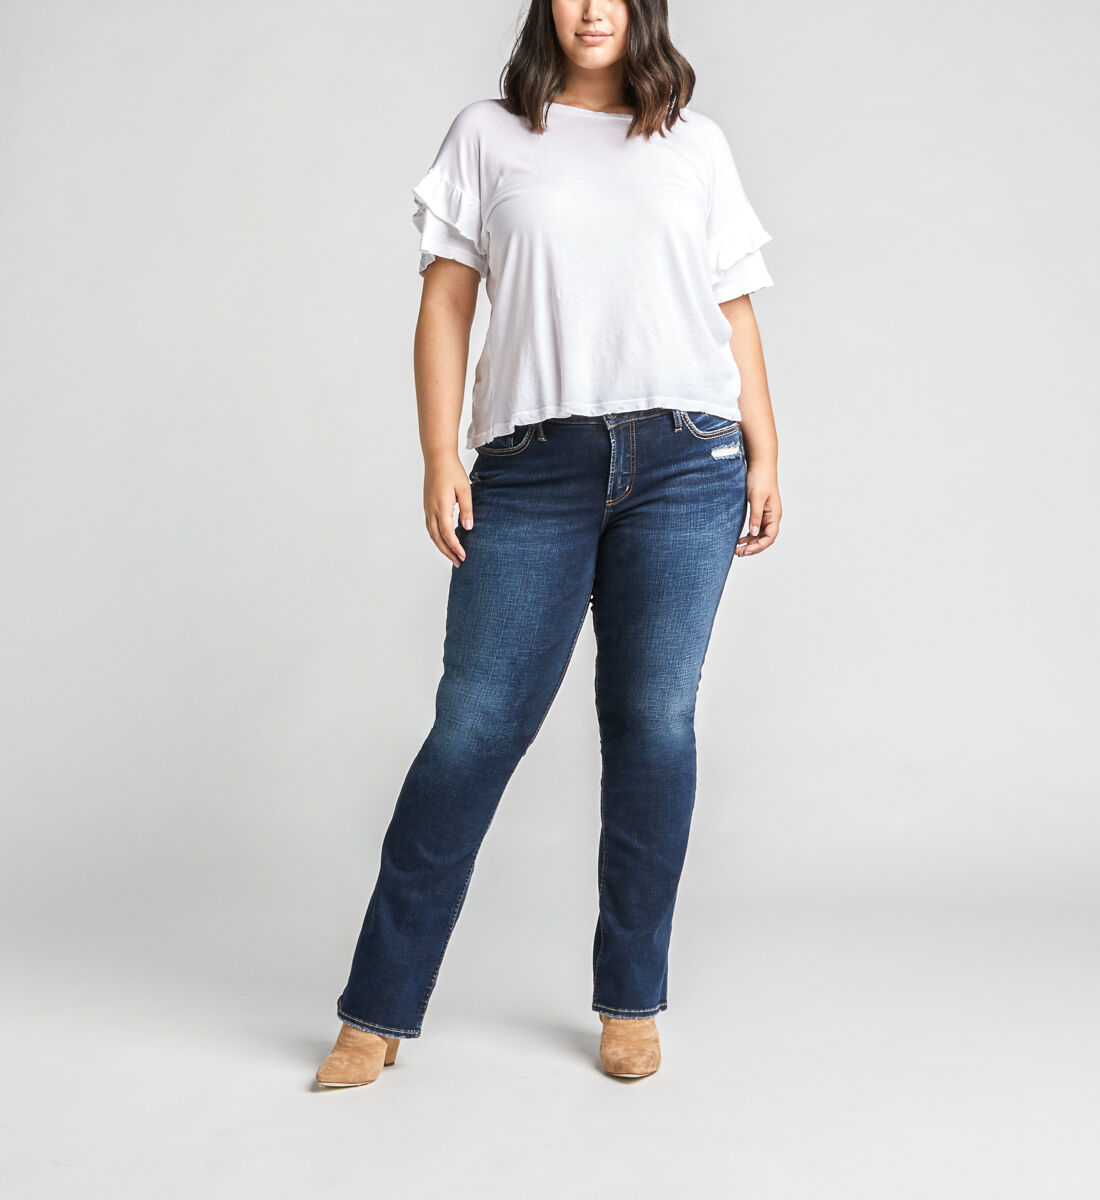 plus size tall jeans with bling